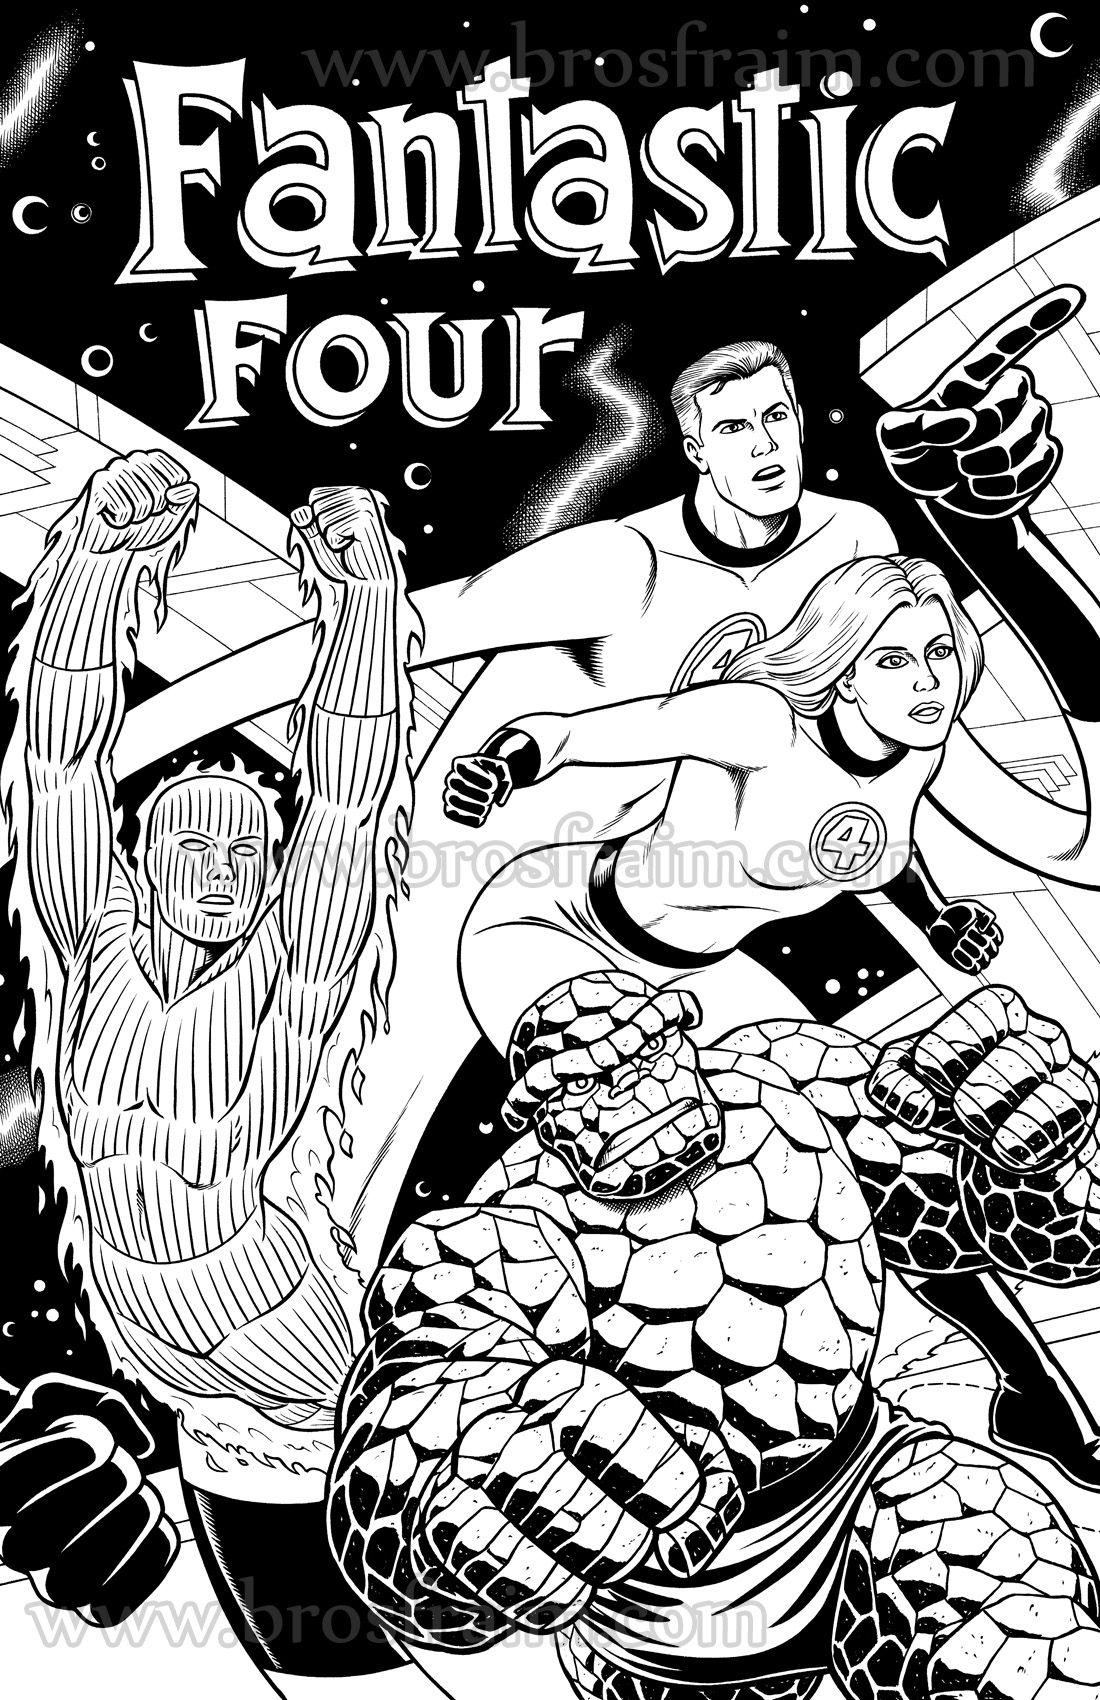 Fantastic Four Black and White Logo - FANTASTIC FOUR with Logo! #2, in Brendon and Brian Fraim's 11x14 and ...